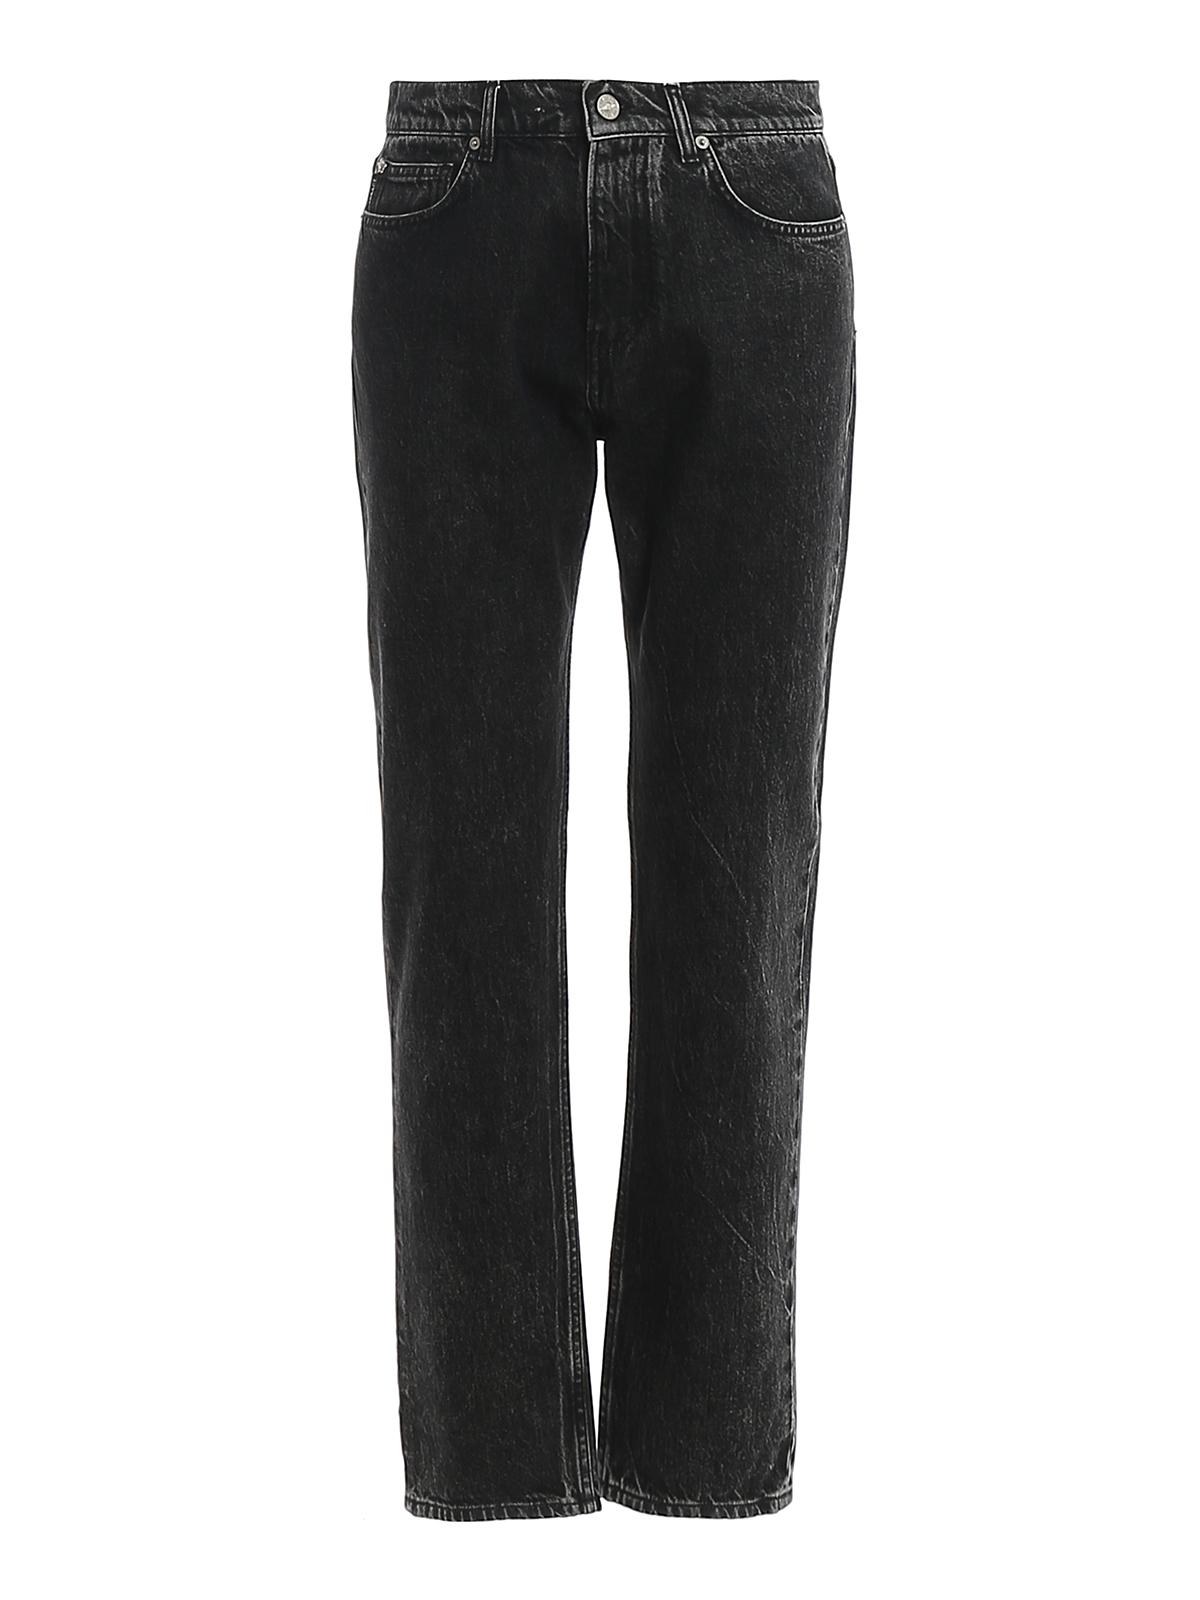 Versace Leather Patch Jeans in Black for Men - Lyst